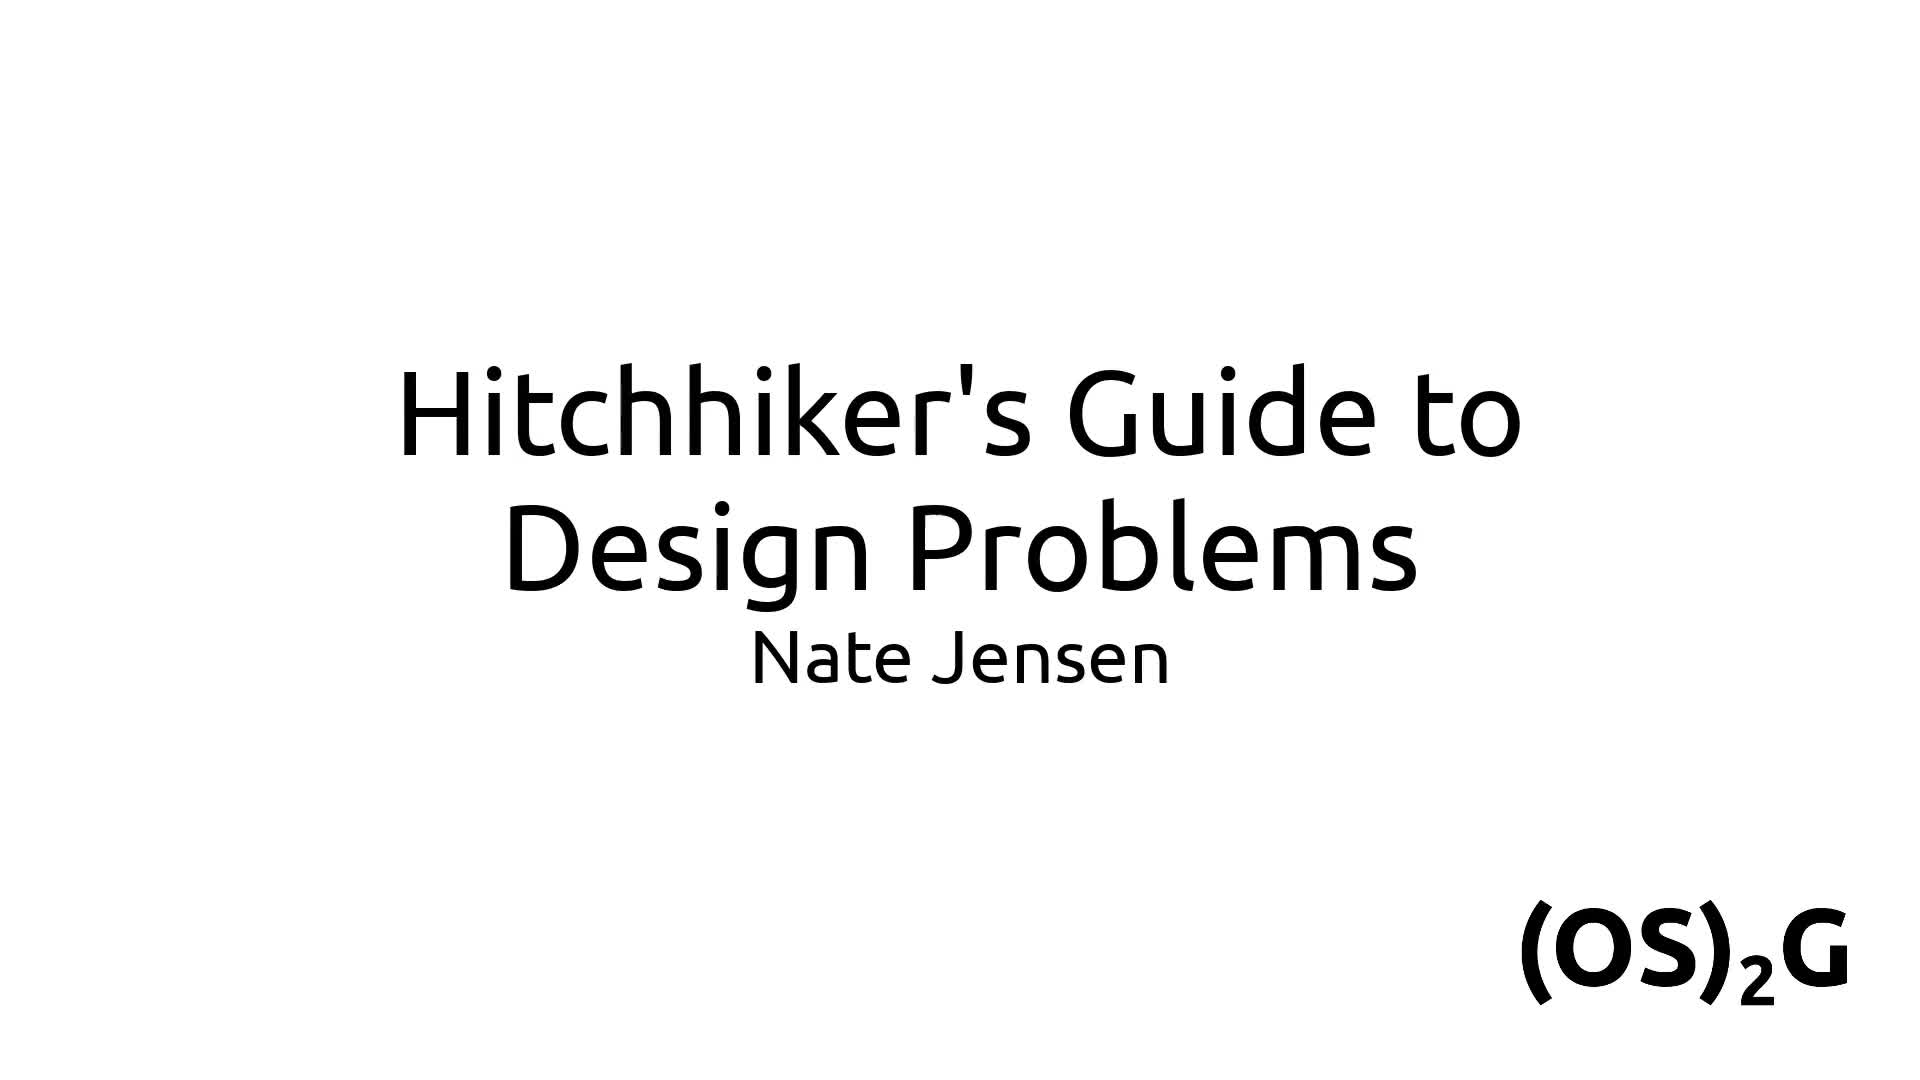 The Hitchhiker's Guide to Design Problems